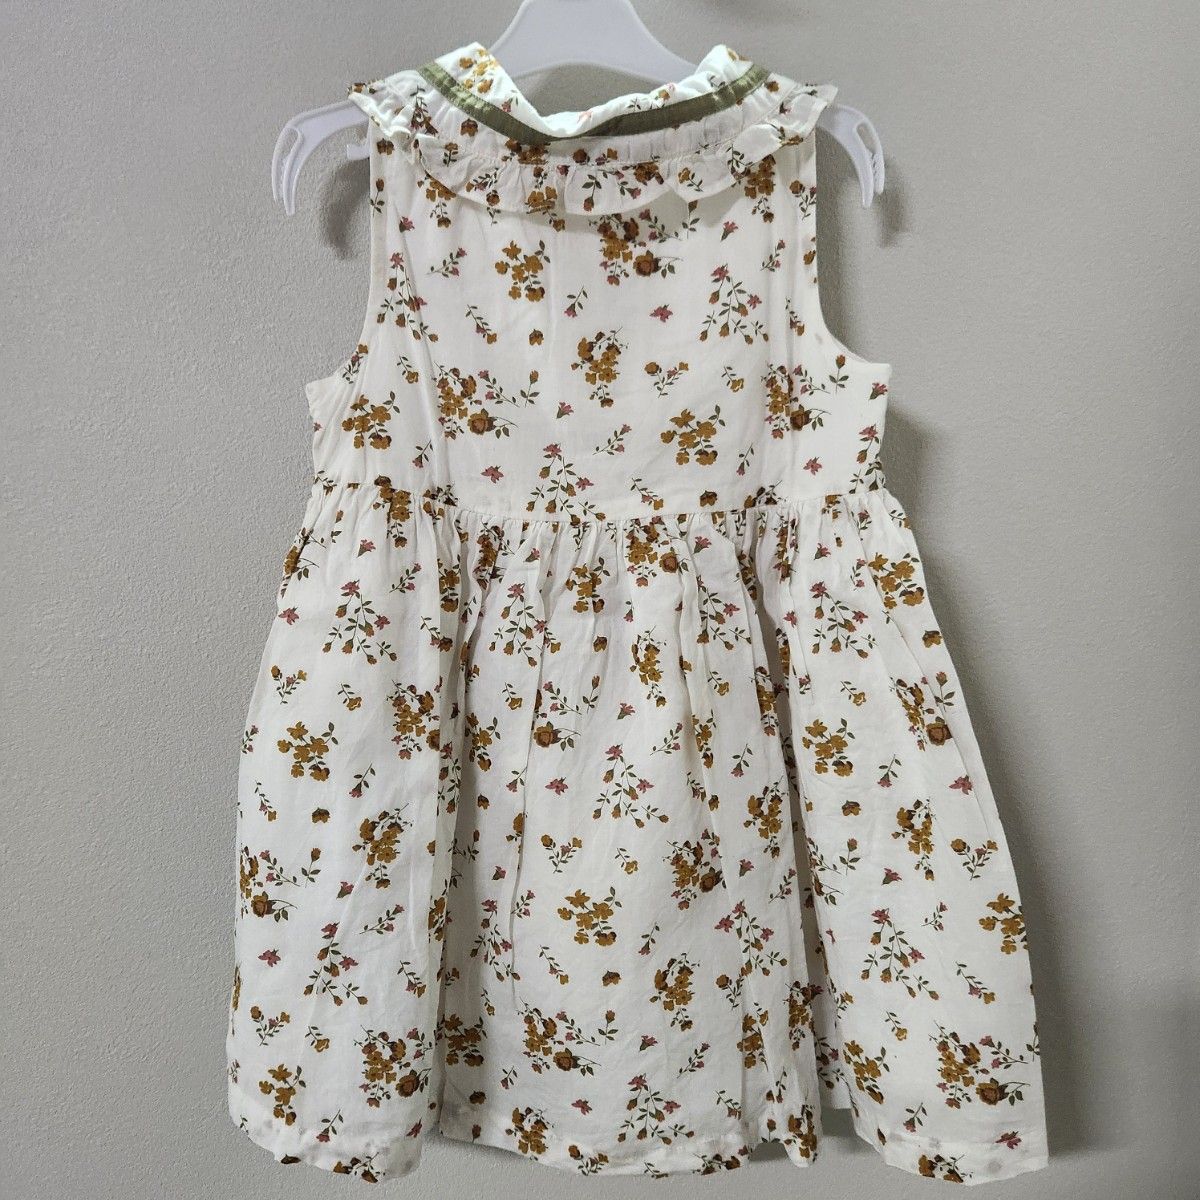 little cotton clothes ワンピース 花柄 2-3y 女の子 半袖 キッズ